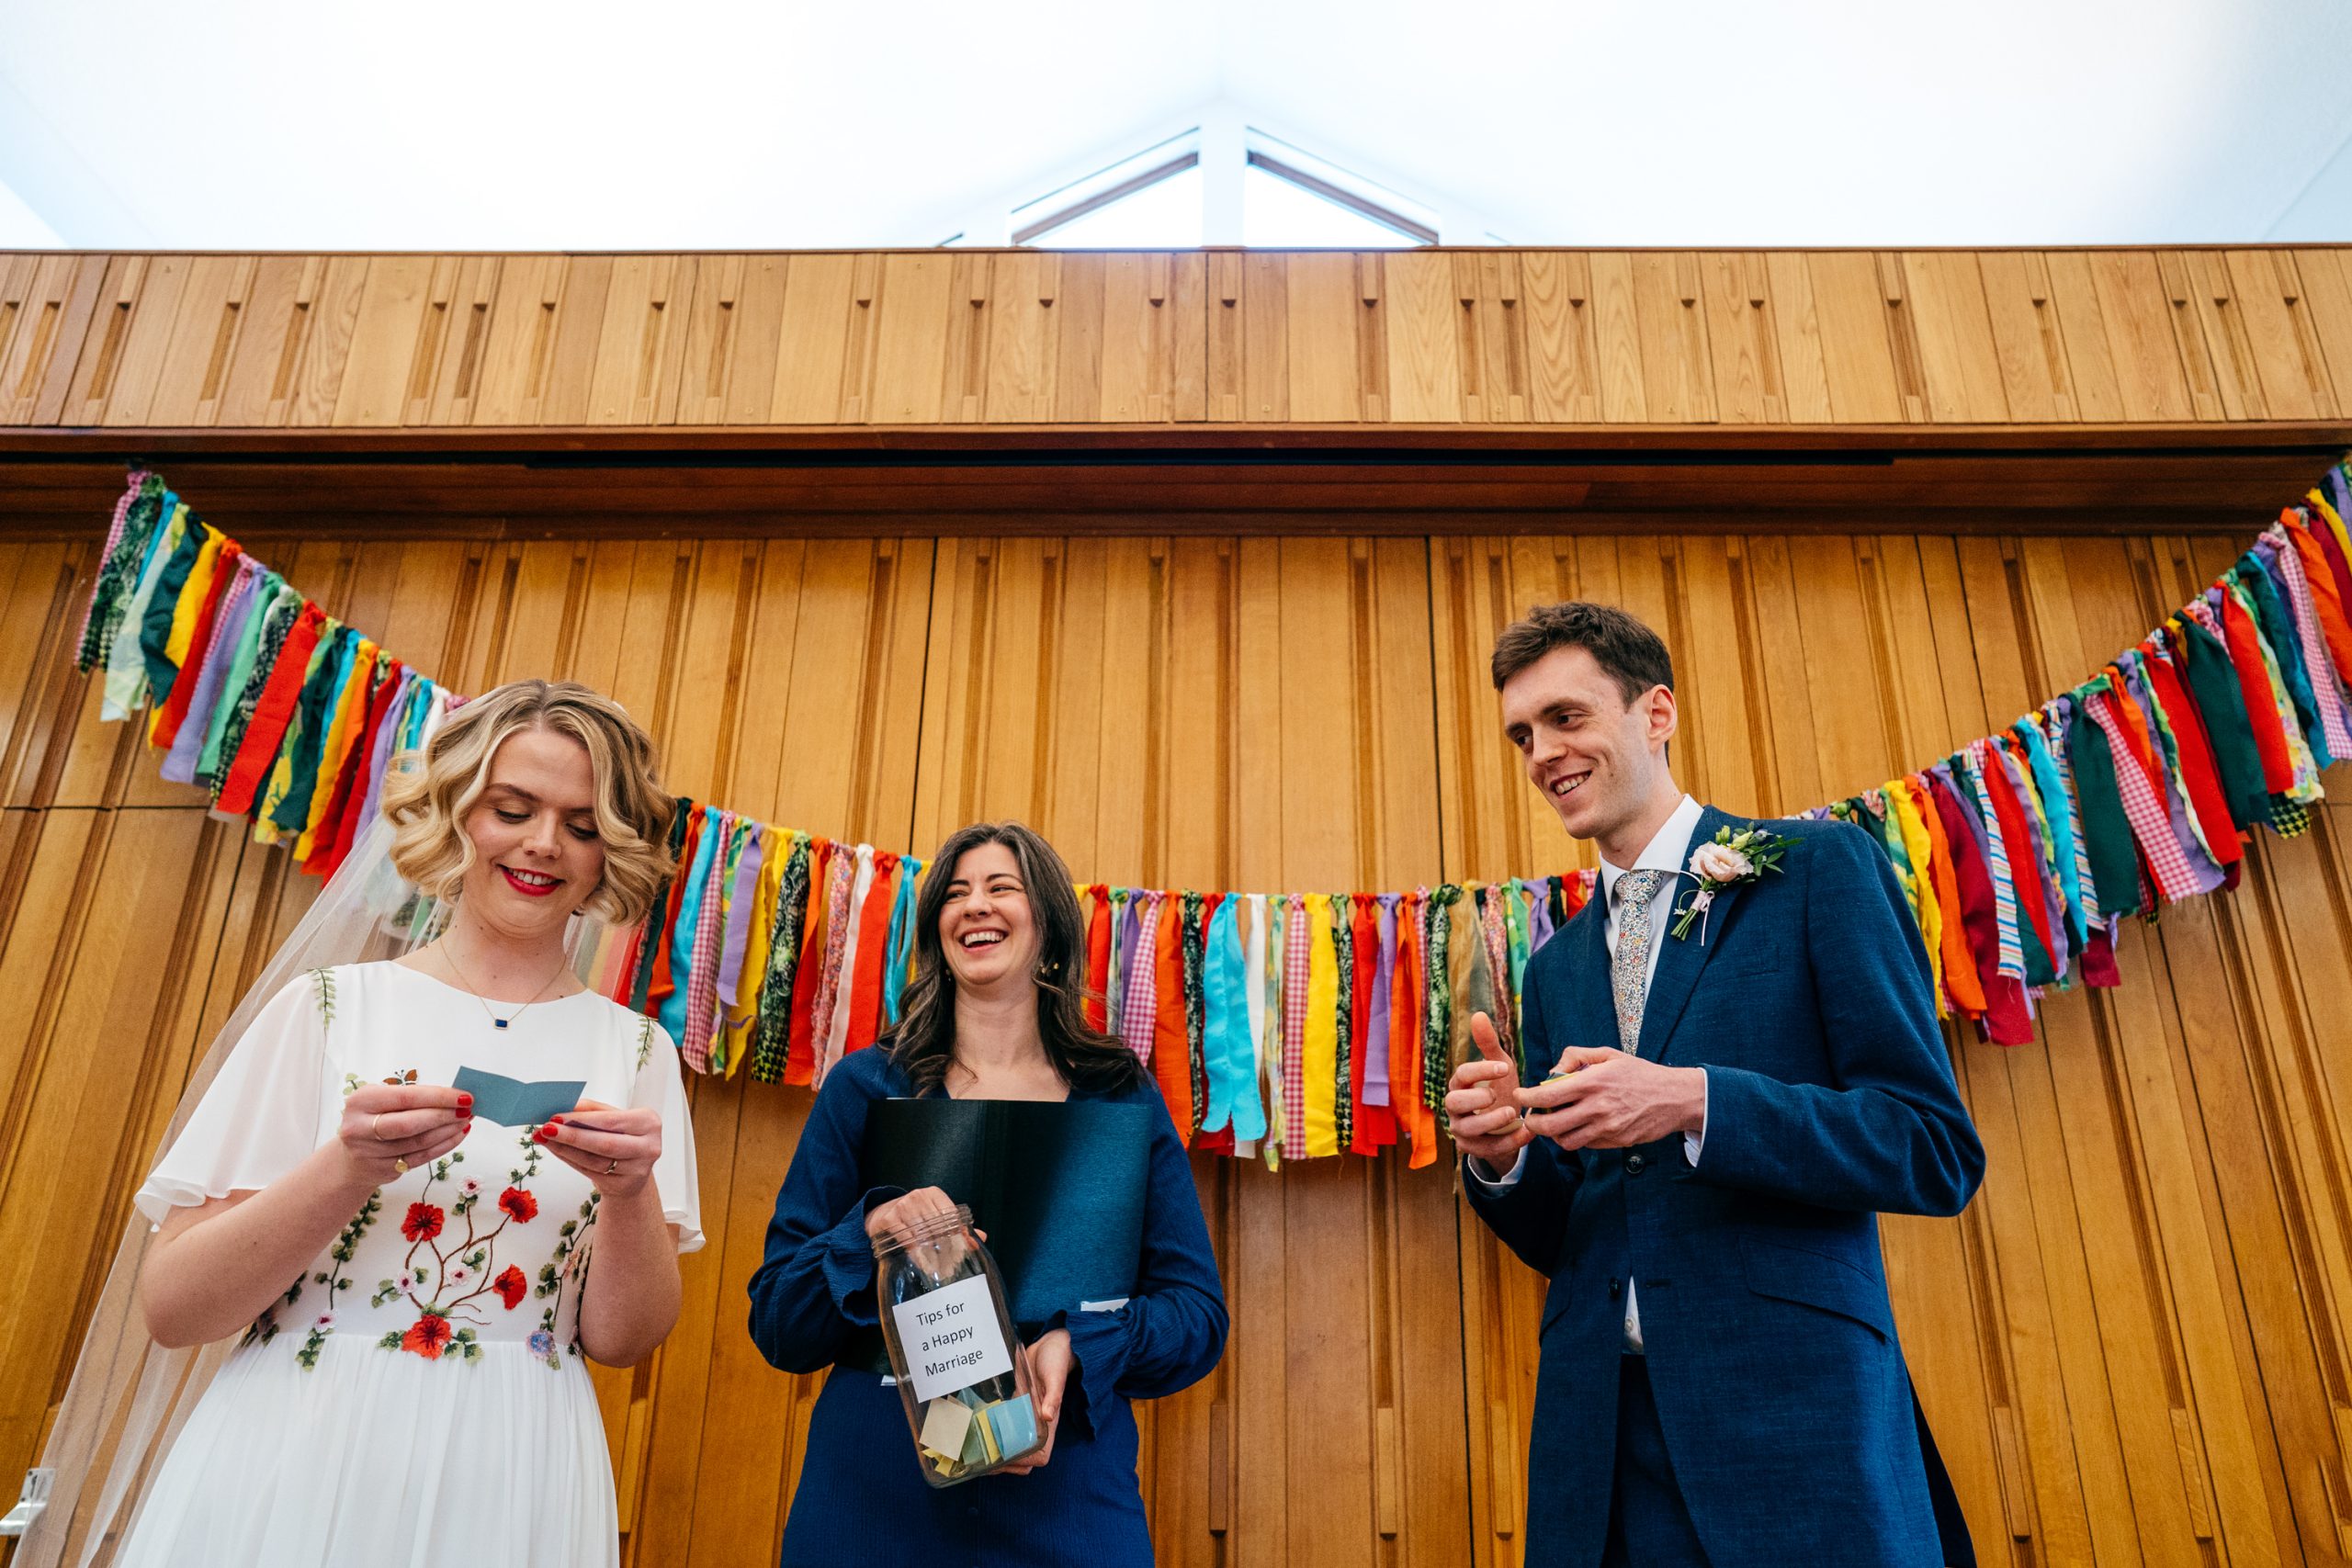 Bride and Groom with Laura Grimson - Humanist Celebrant - open wedding tips from their guests during their ceremony. 